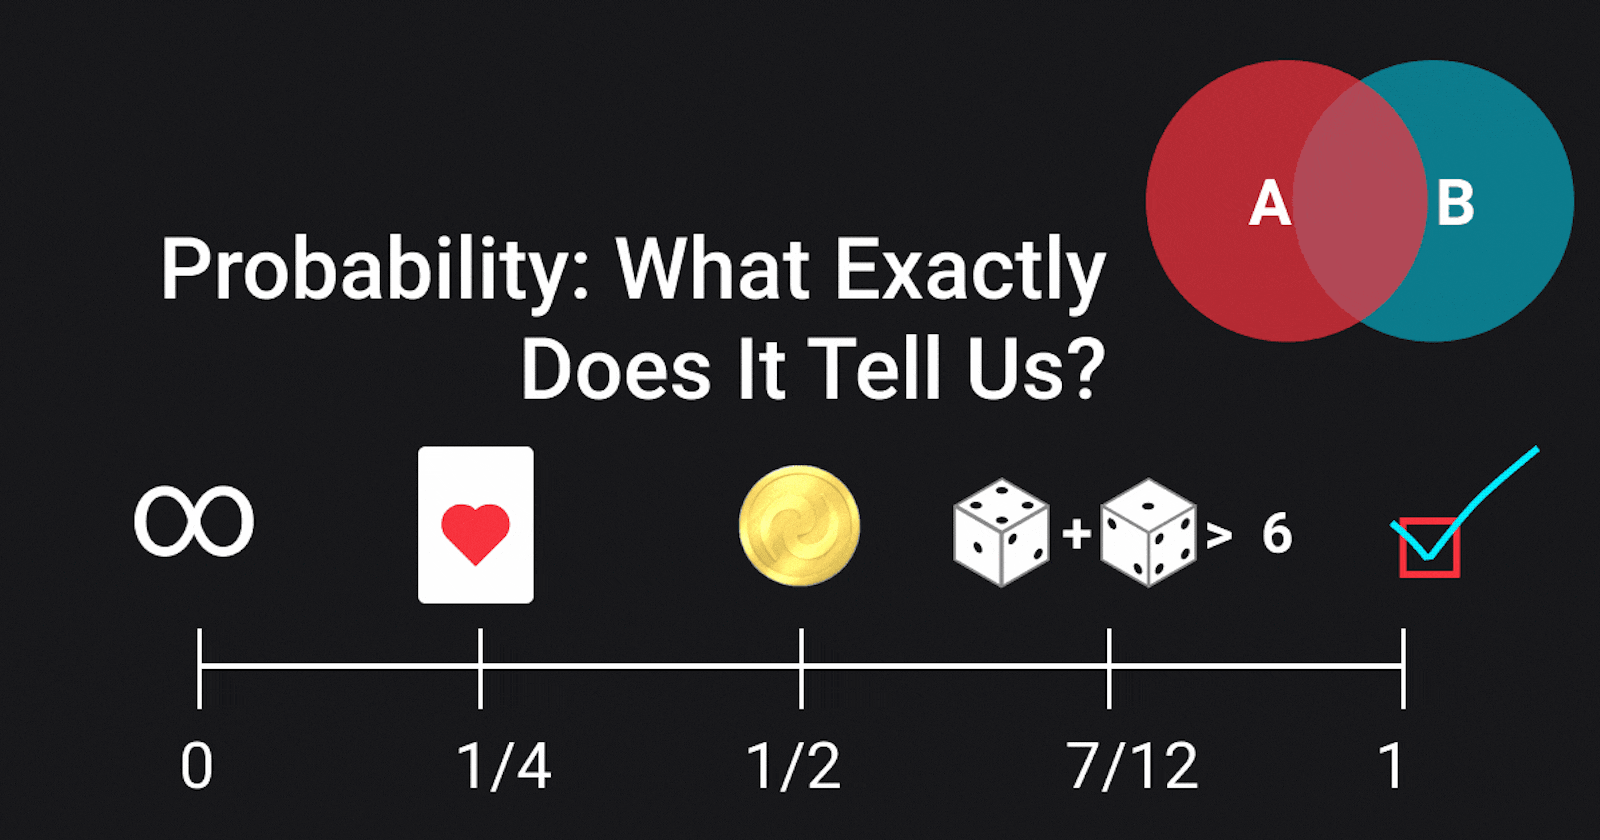 Probability: What Exactly Does It Tell Us?